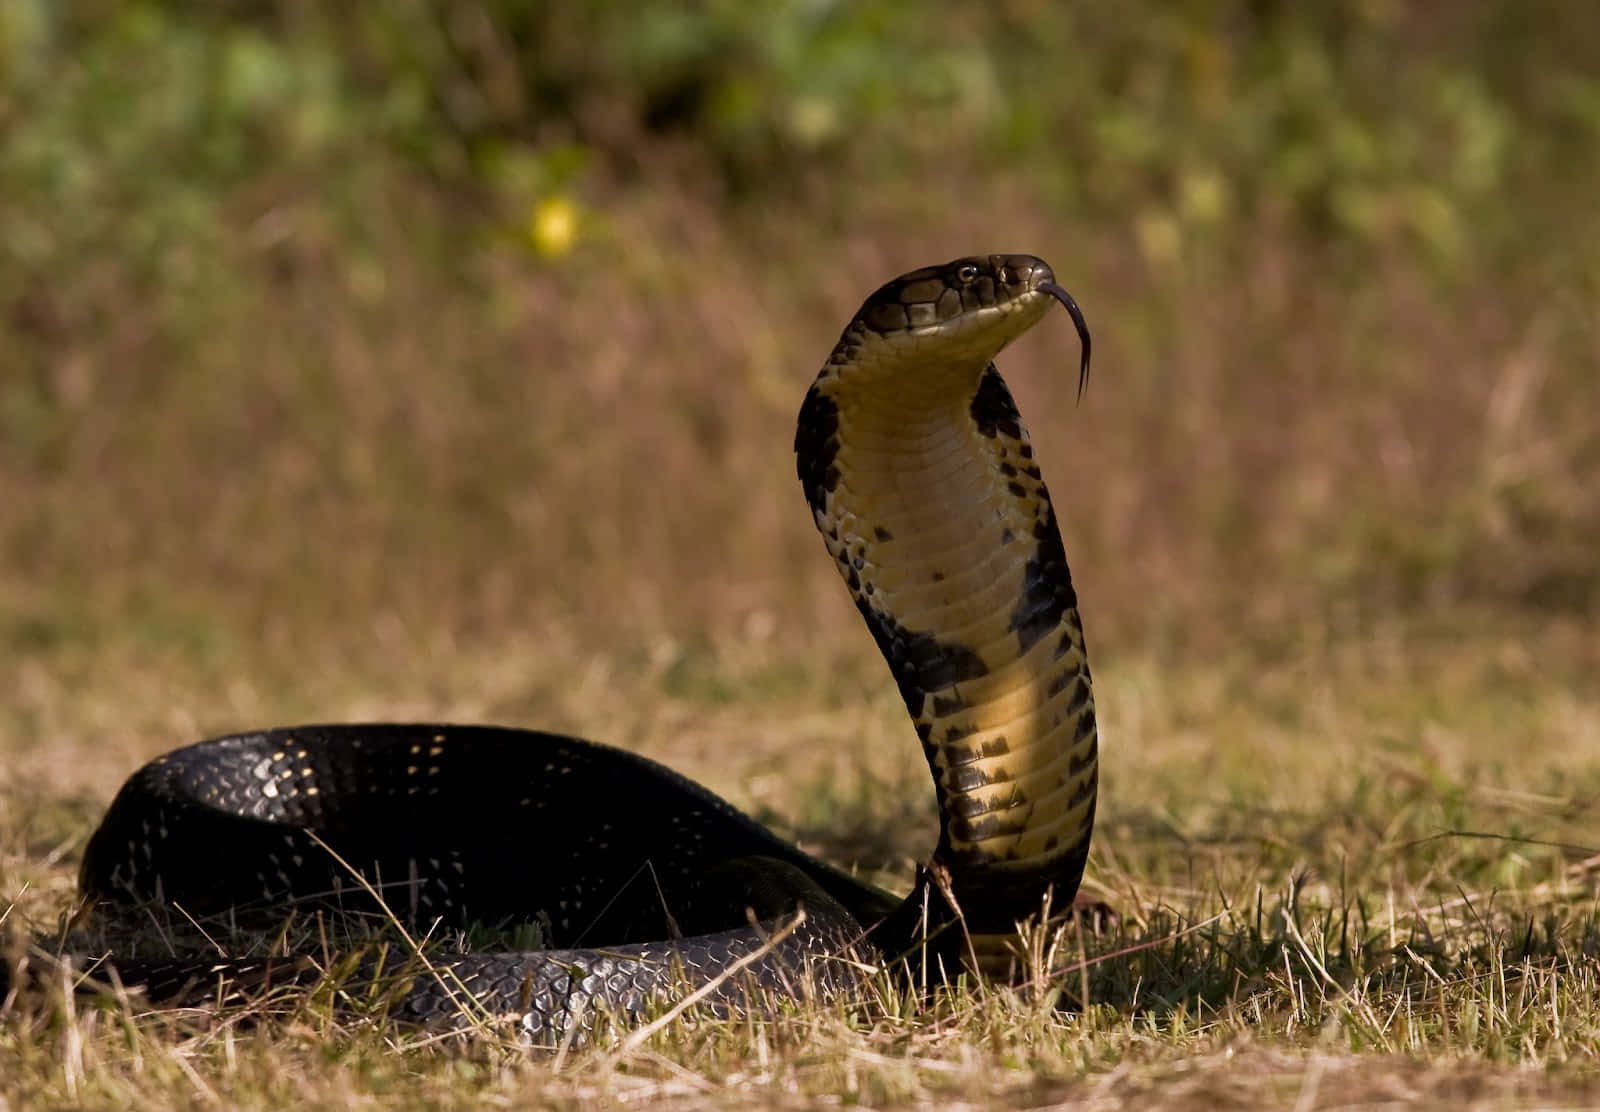 The Deadly, Fearsome King Cobra